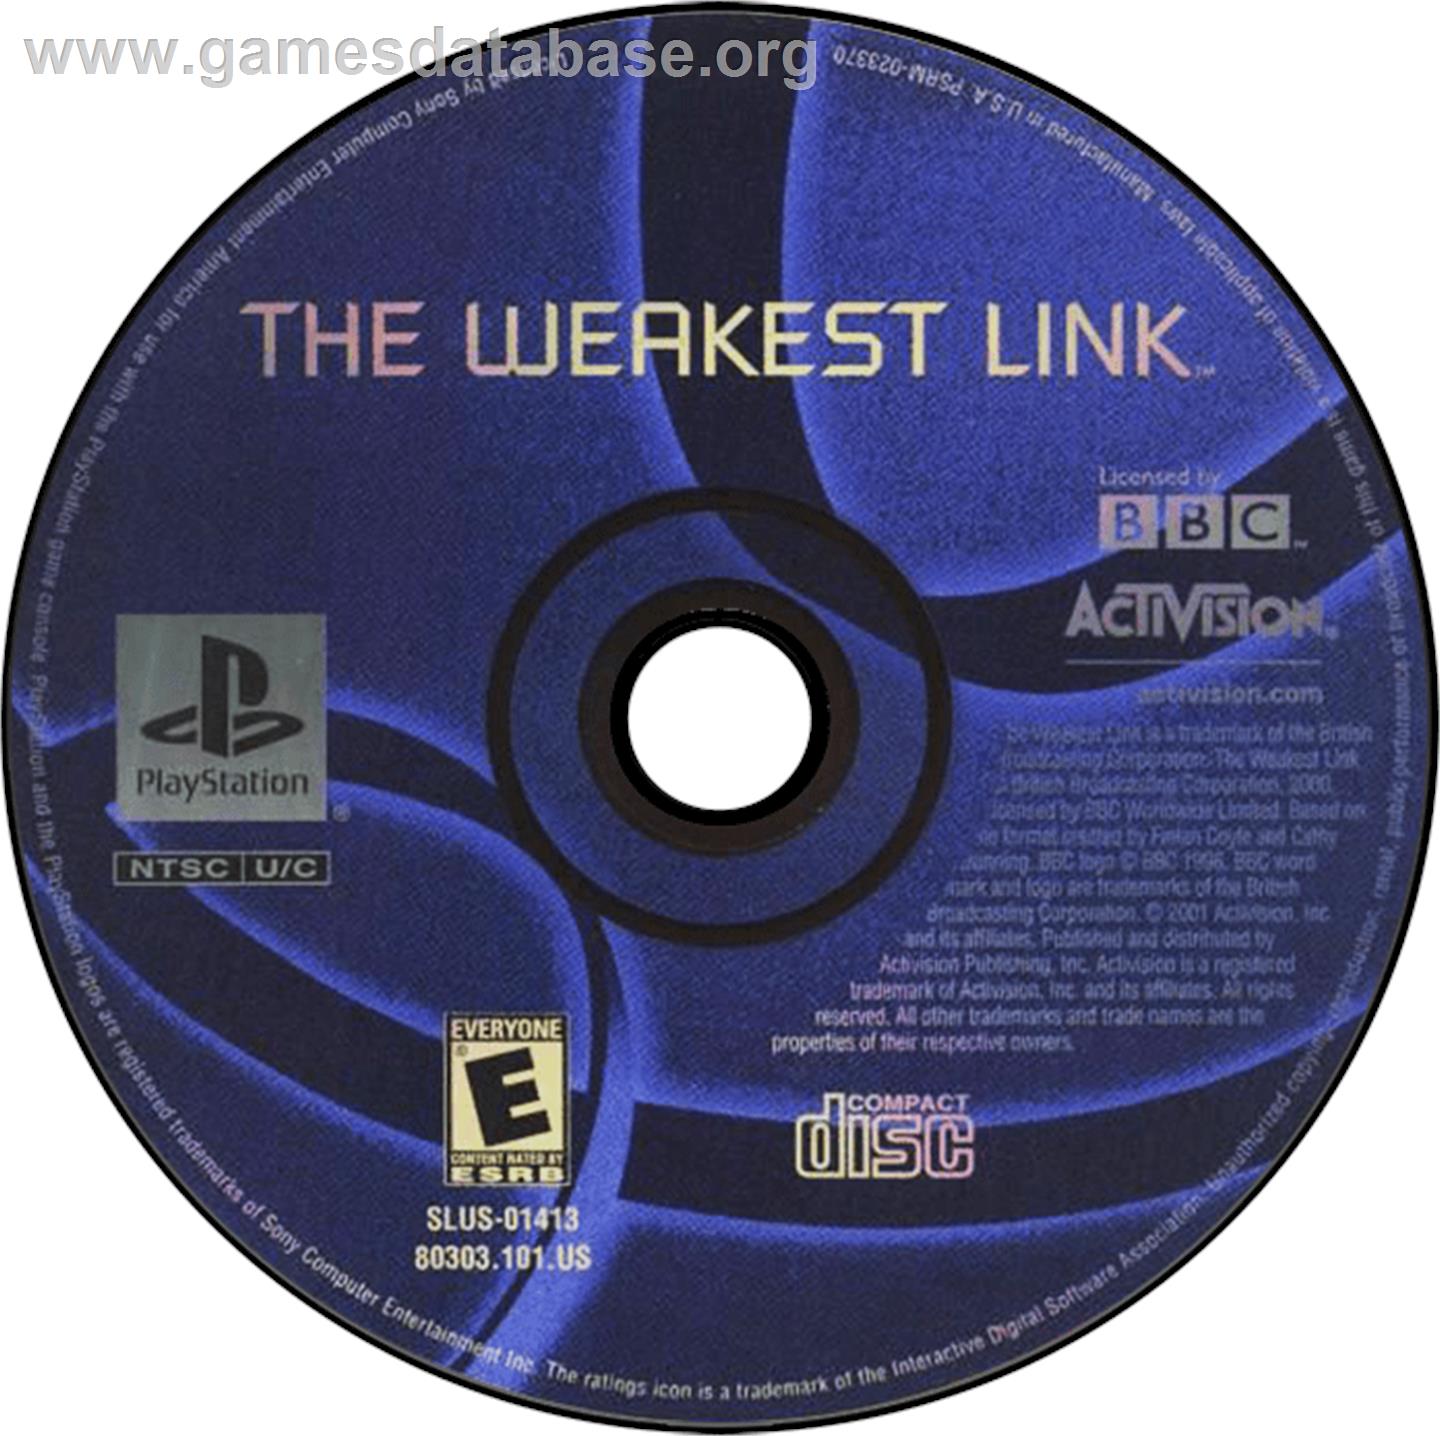 The Weakest Link - Sony Playstation - Artwork - Disc